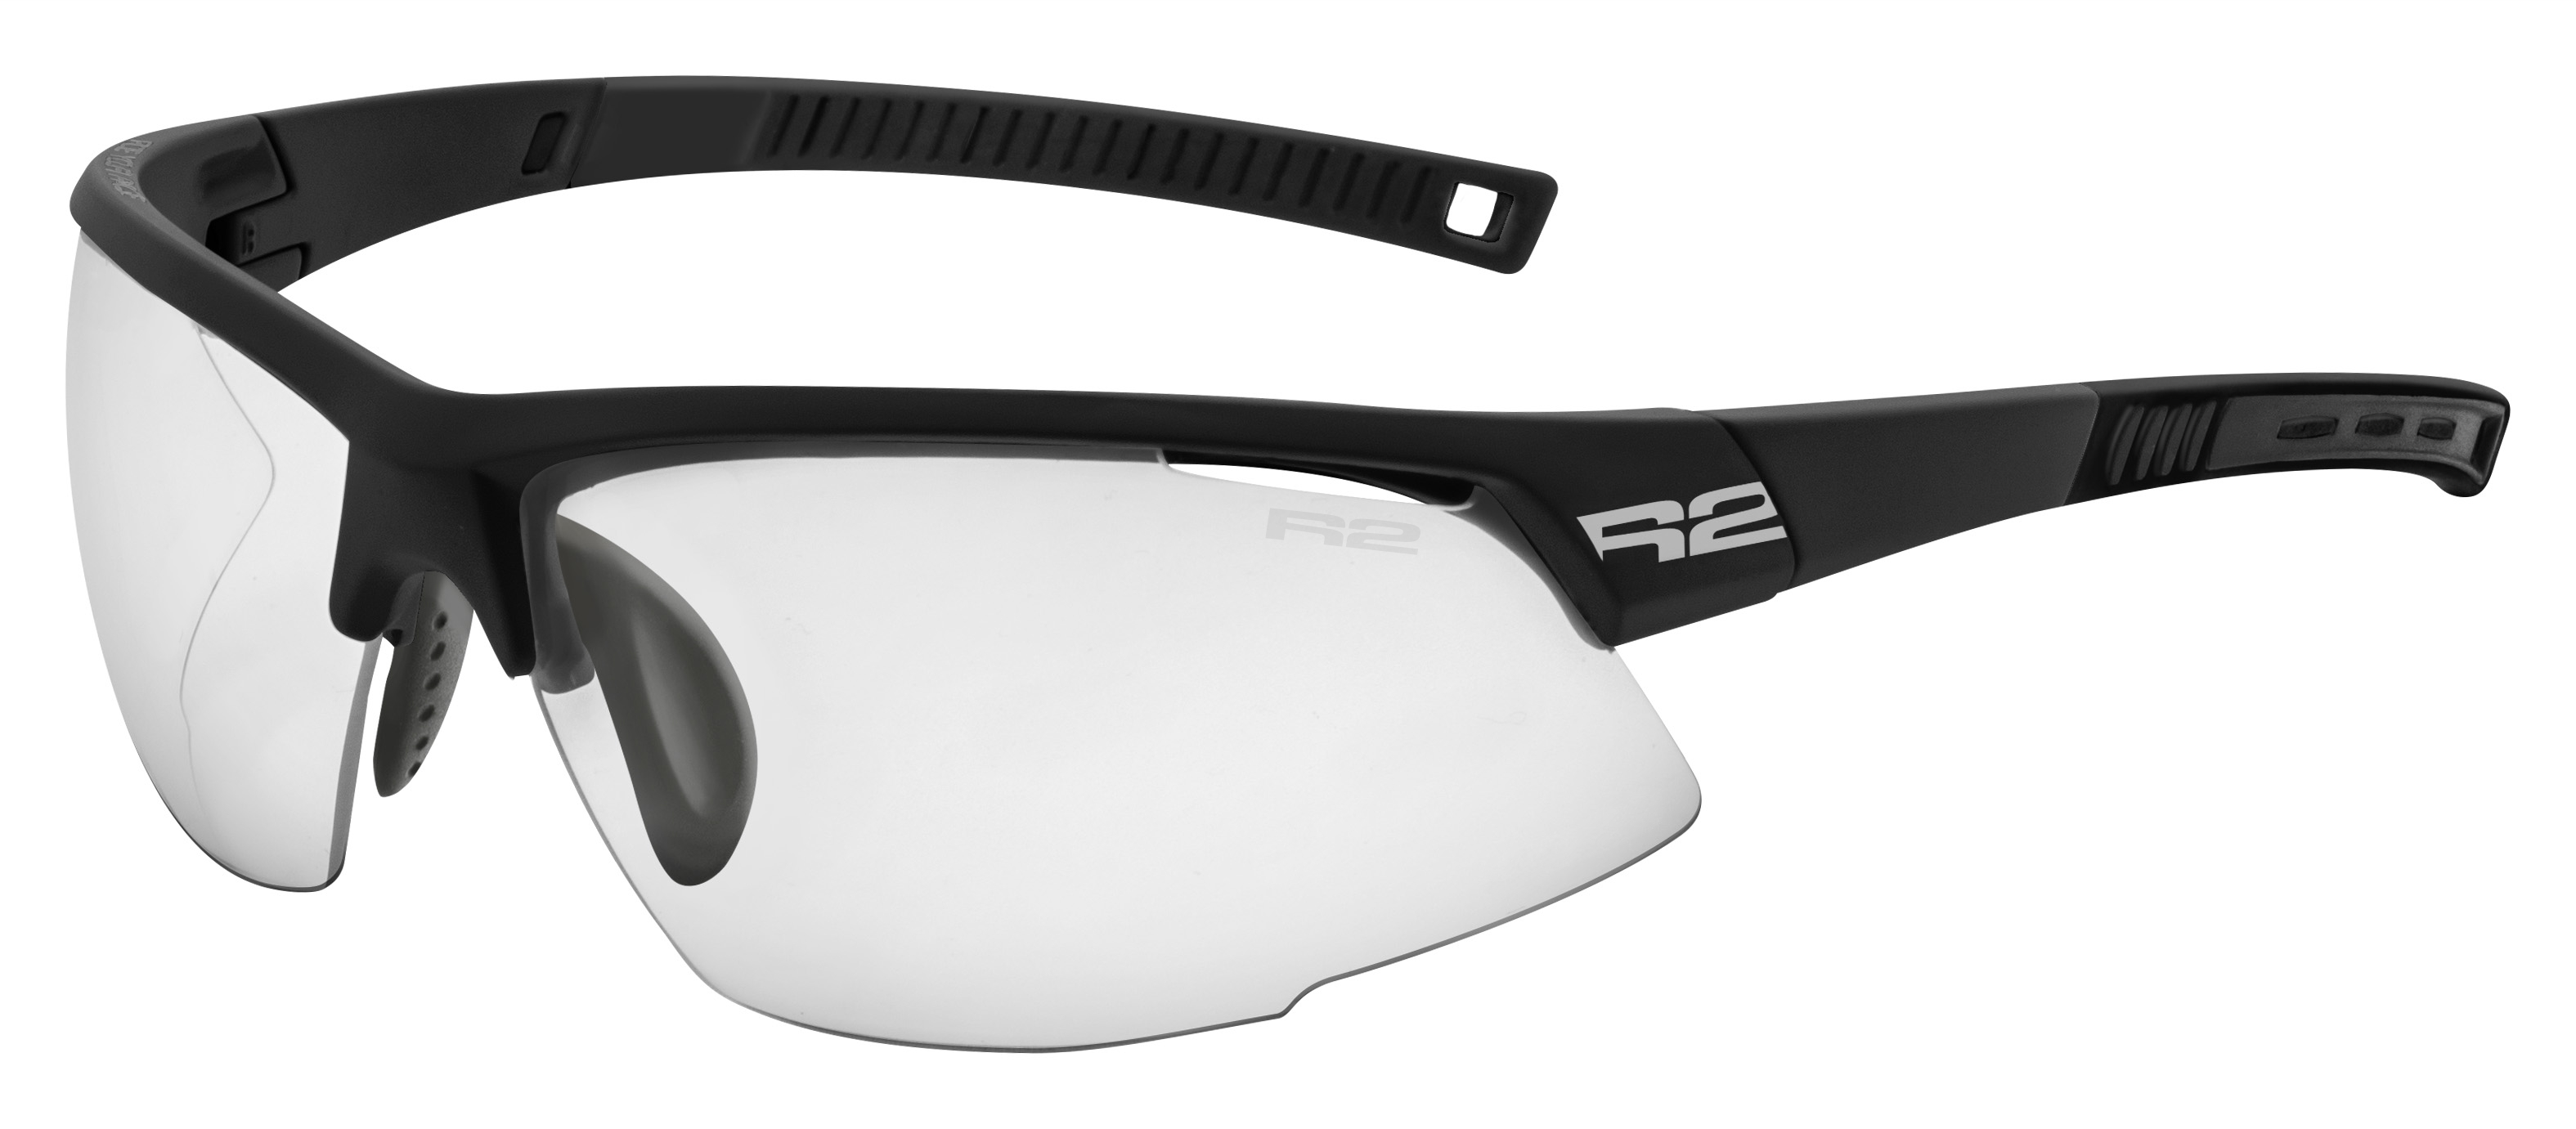 Photochromatic sunglasses  R2 RACER AT063A2